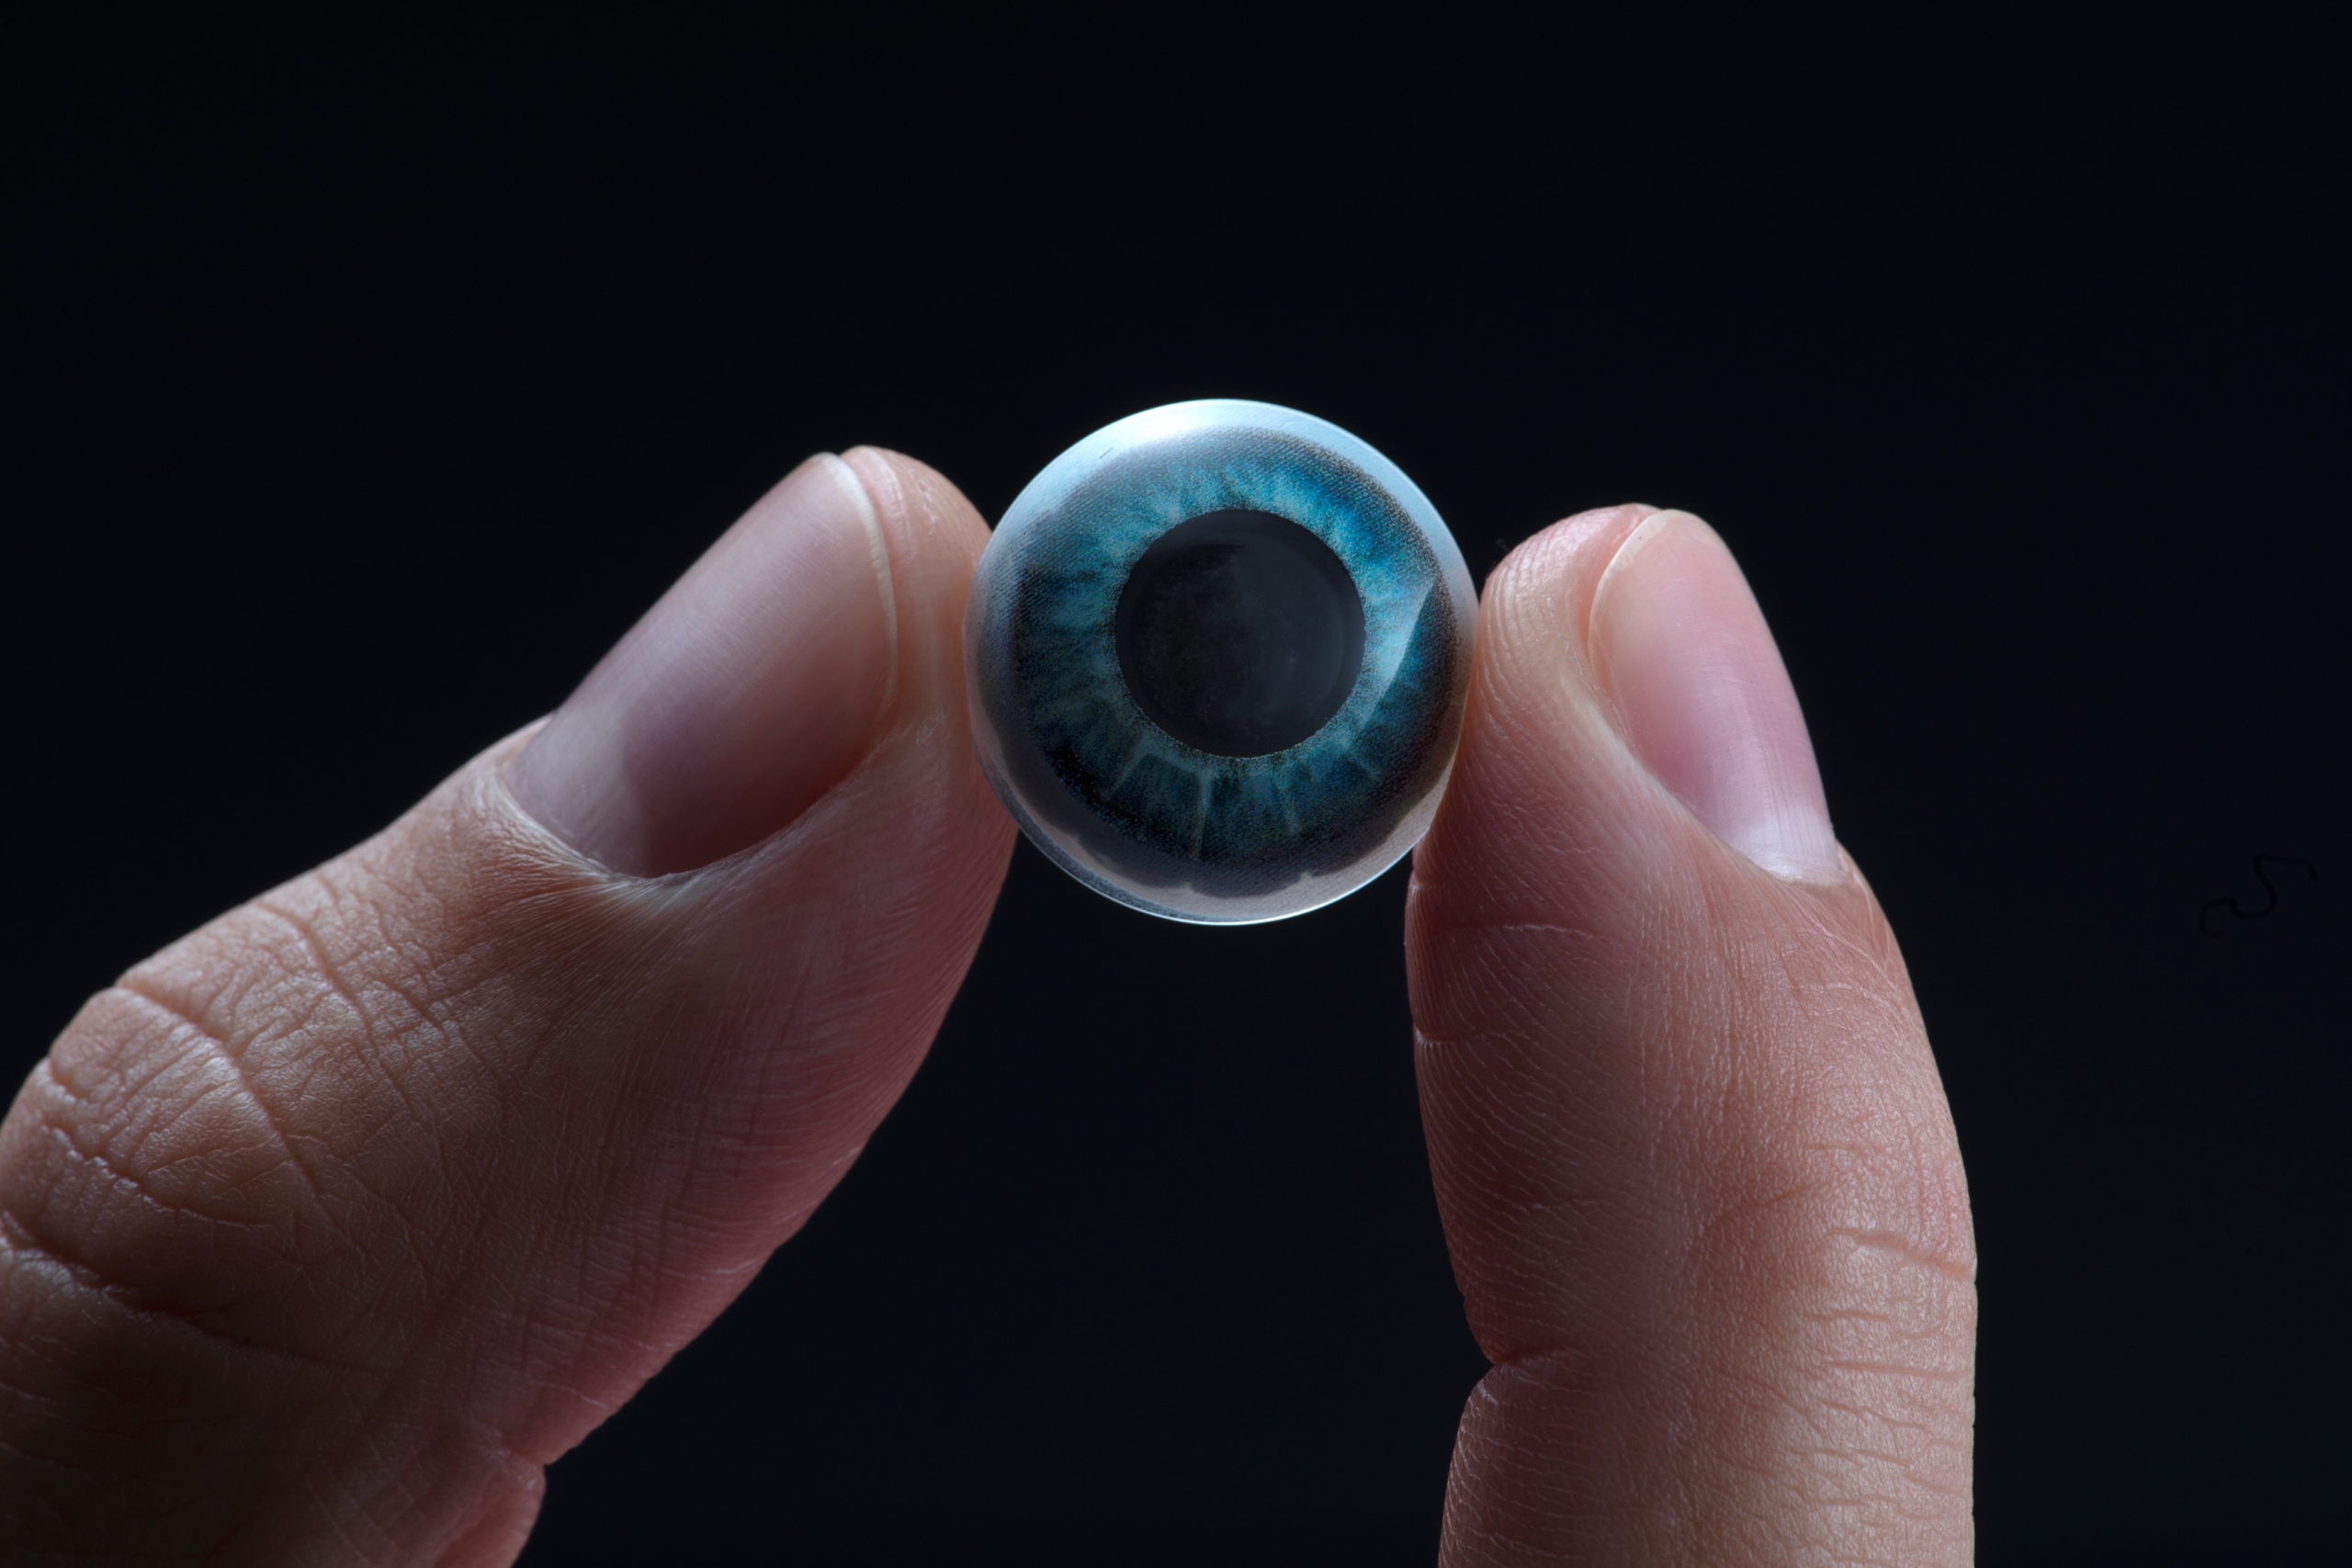 A contact lens from Mojo Vision promises augmented reality